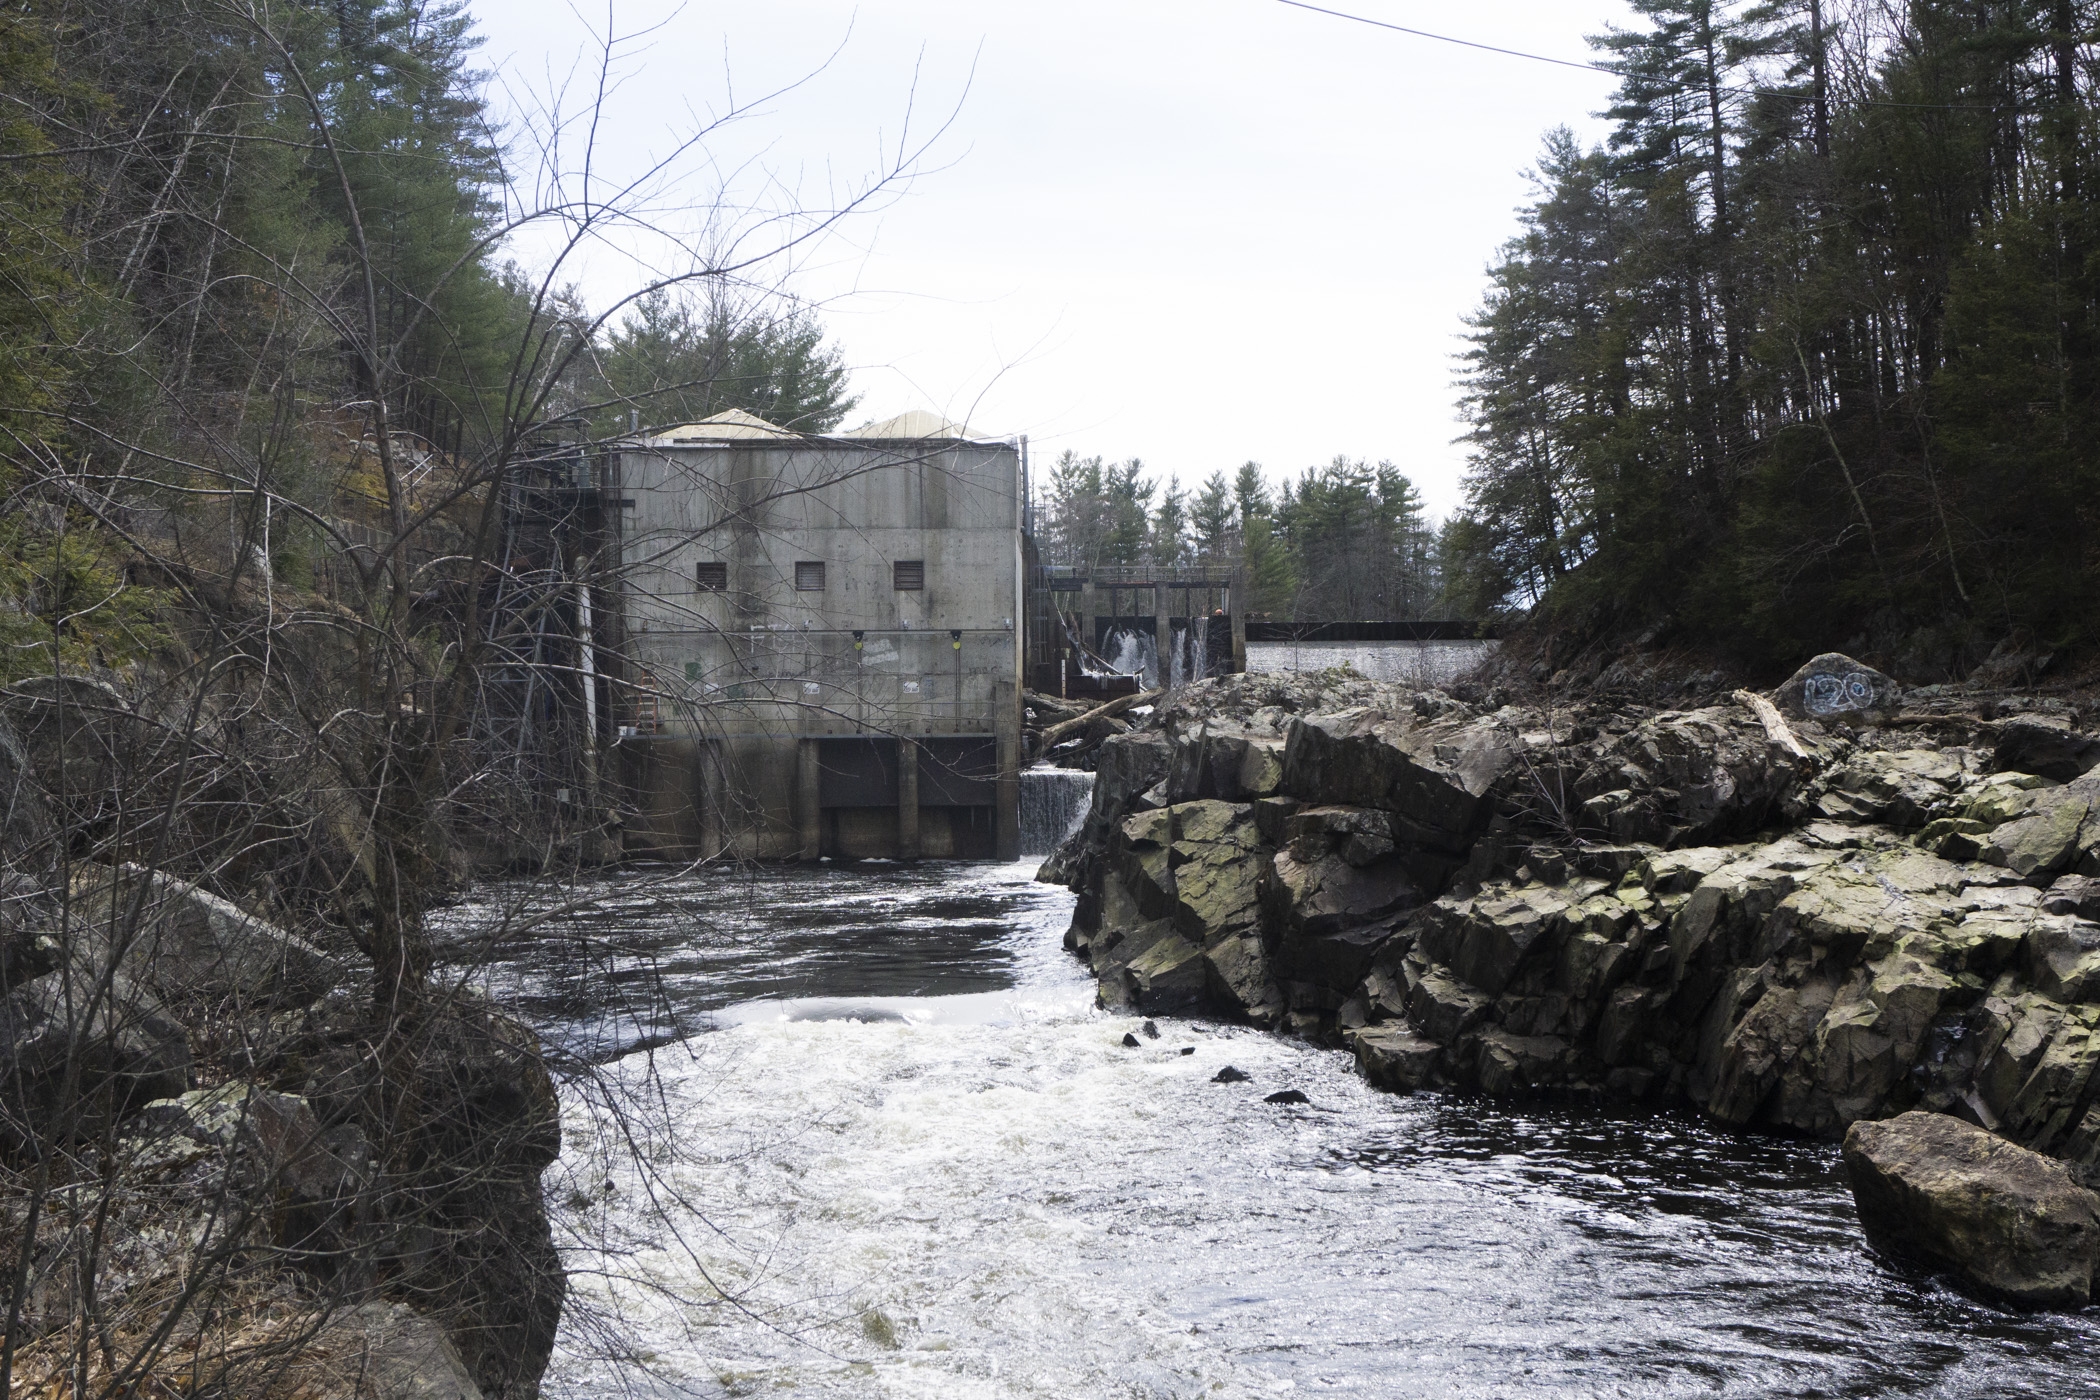 Mine Falls Hydroelectric Project Tailrace